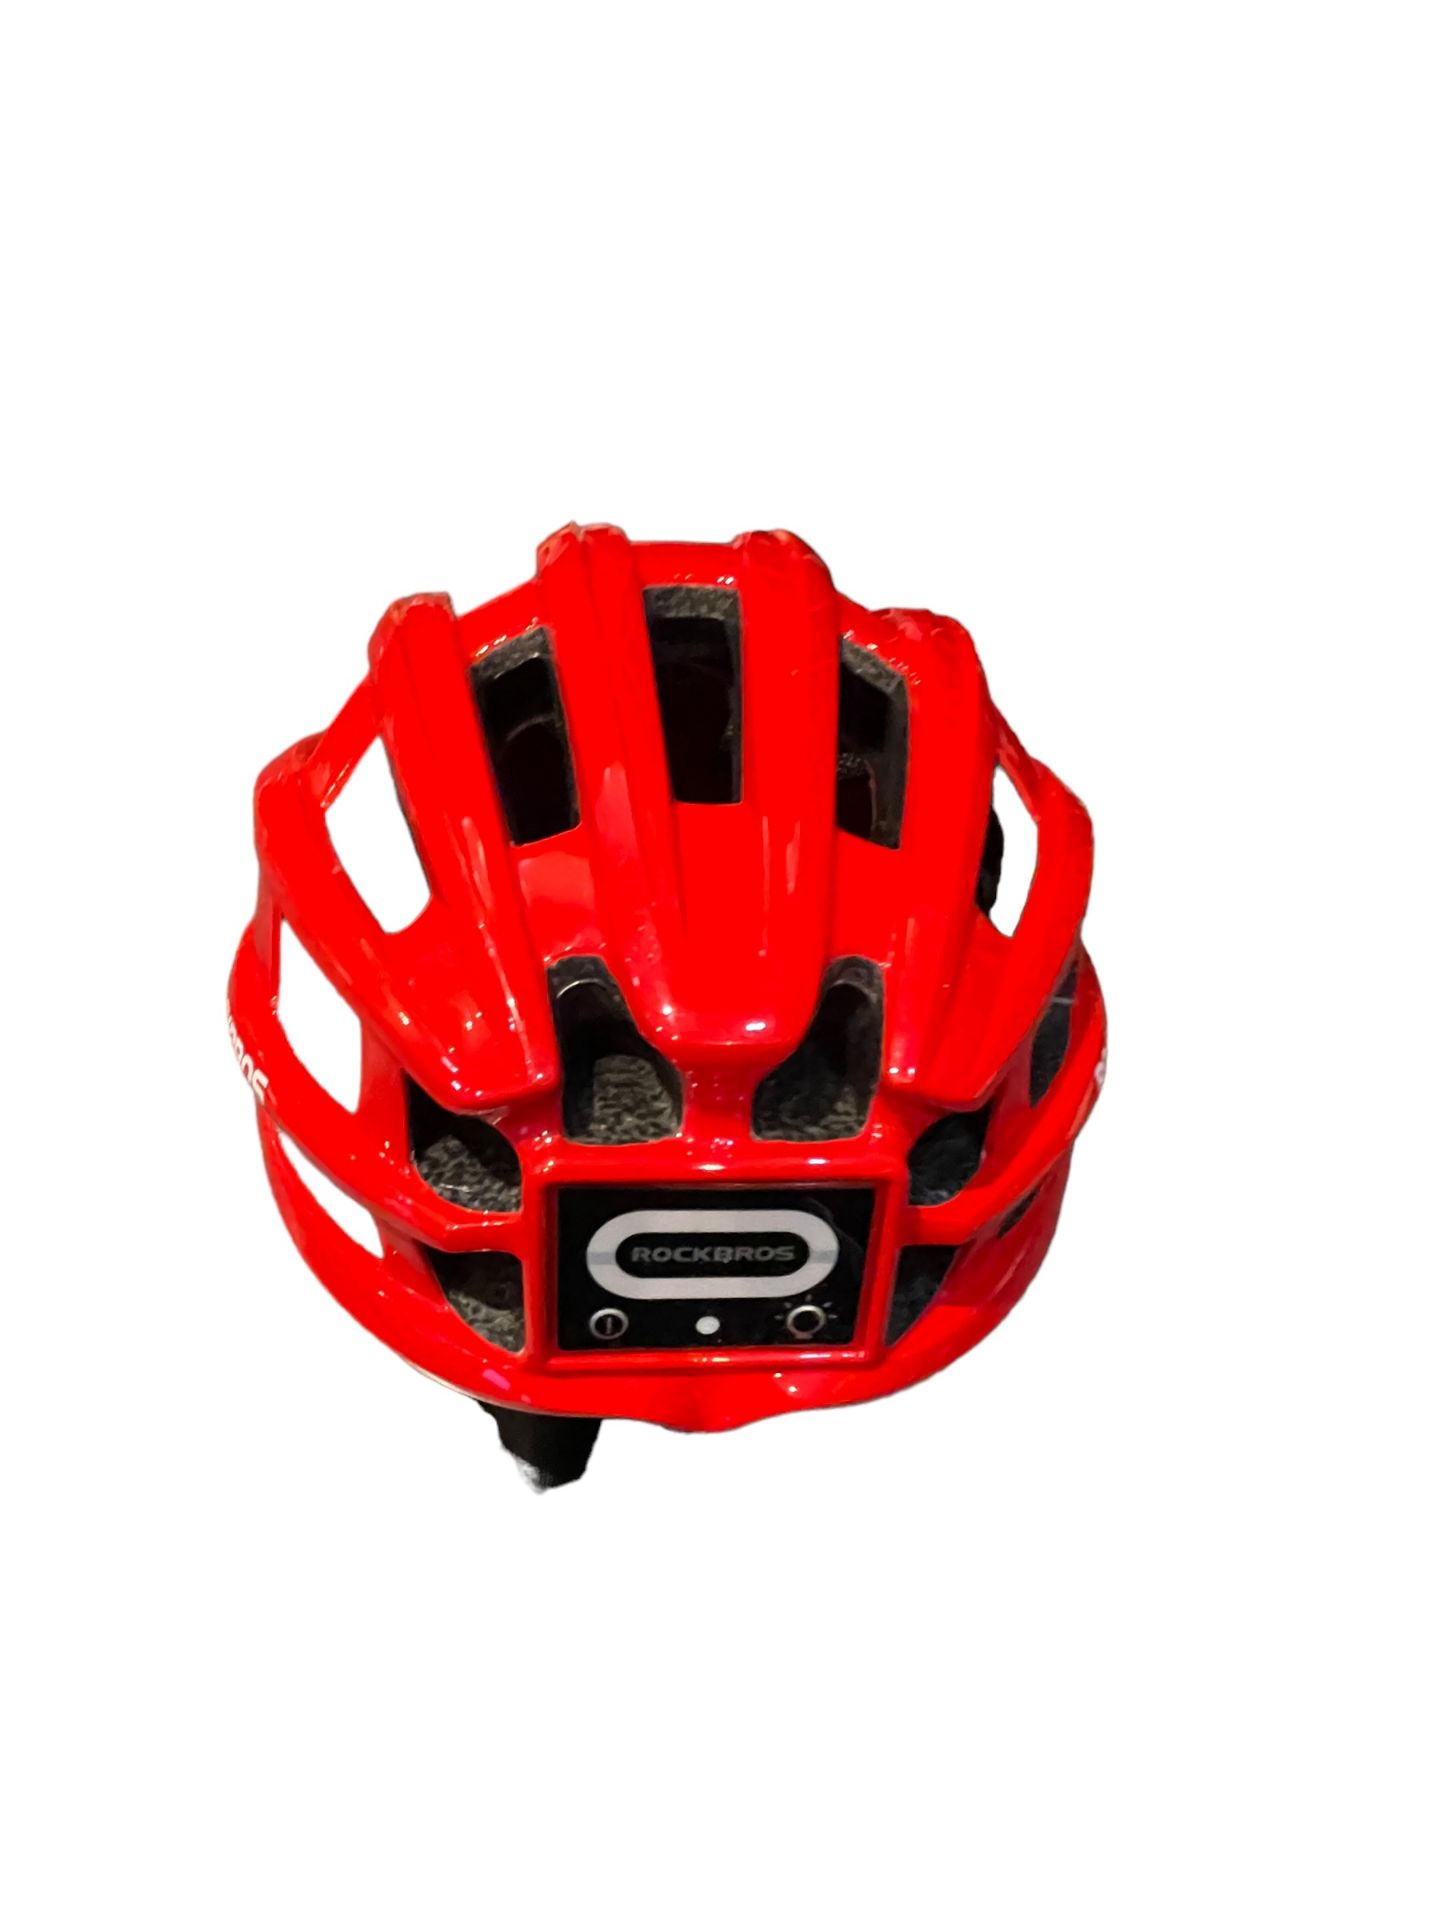 Rock Bros Cycling Helmet fully working boxed demo - Image 4 of 8